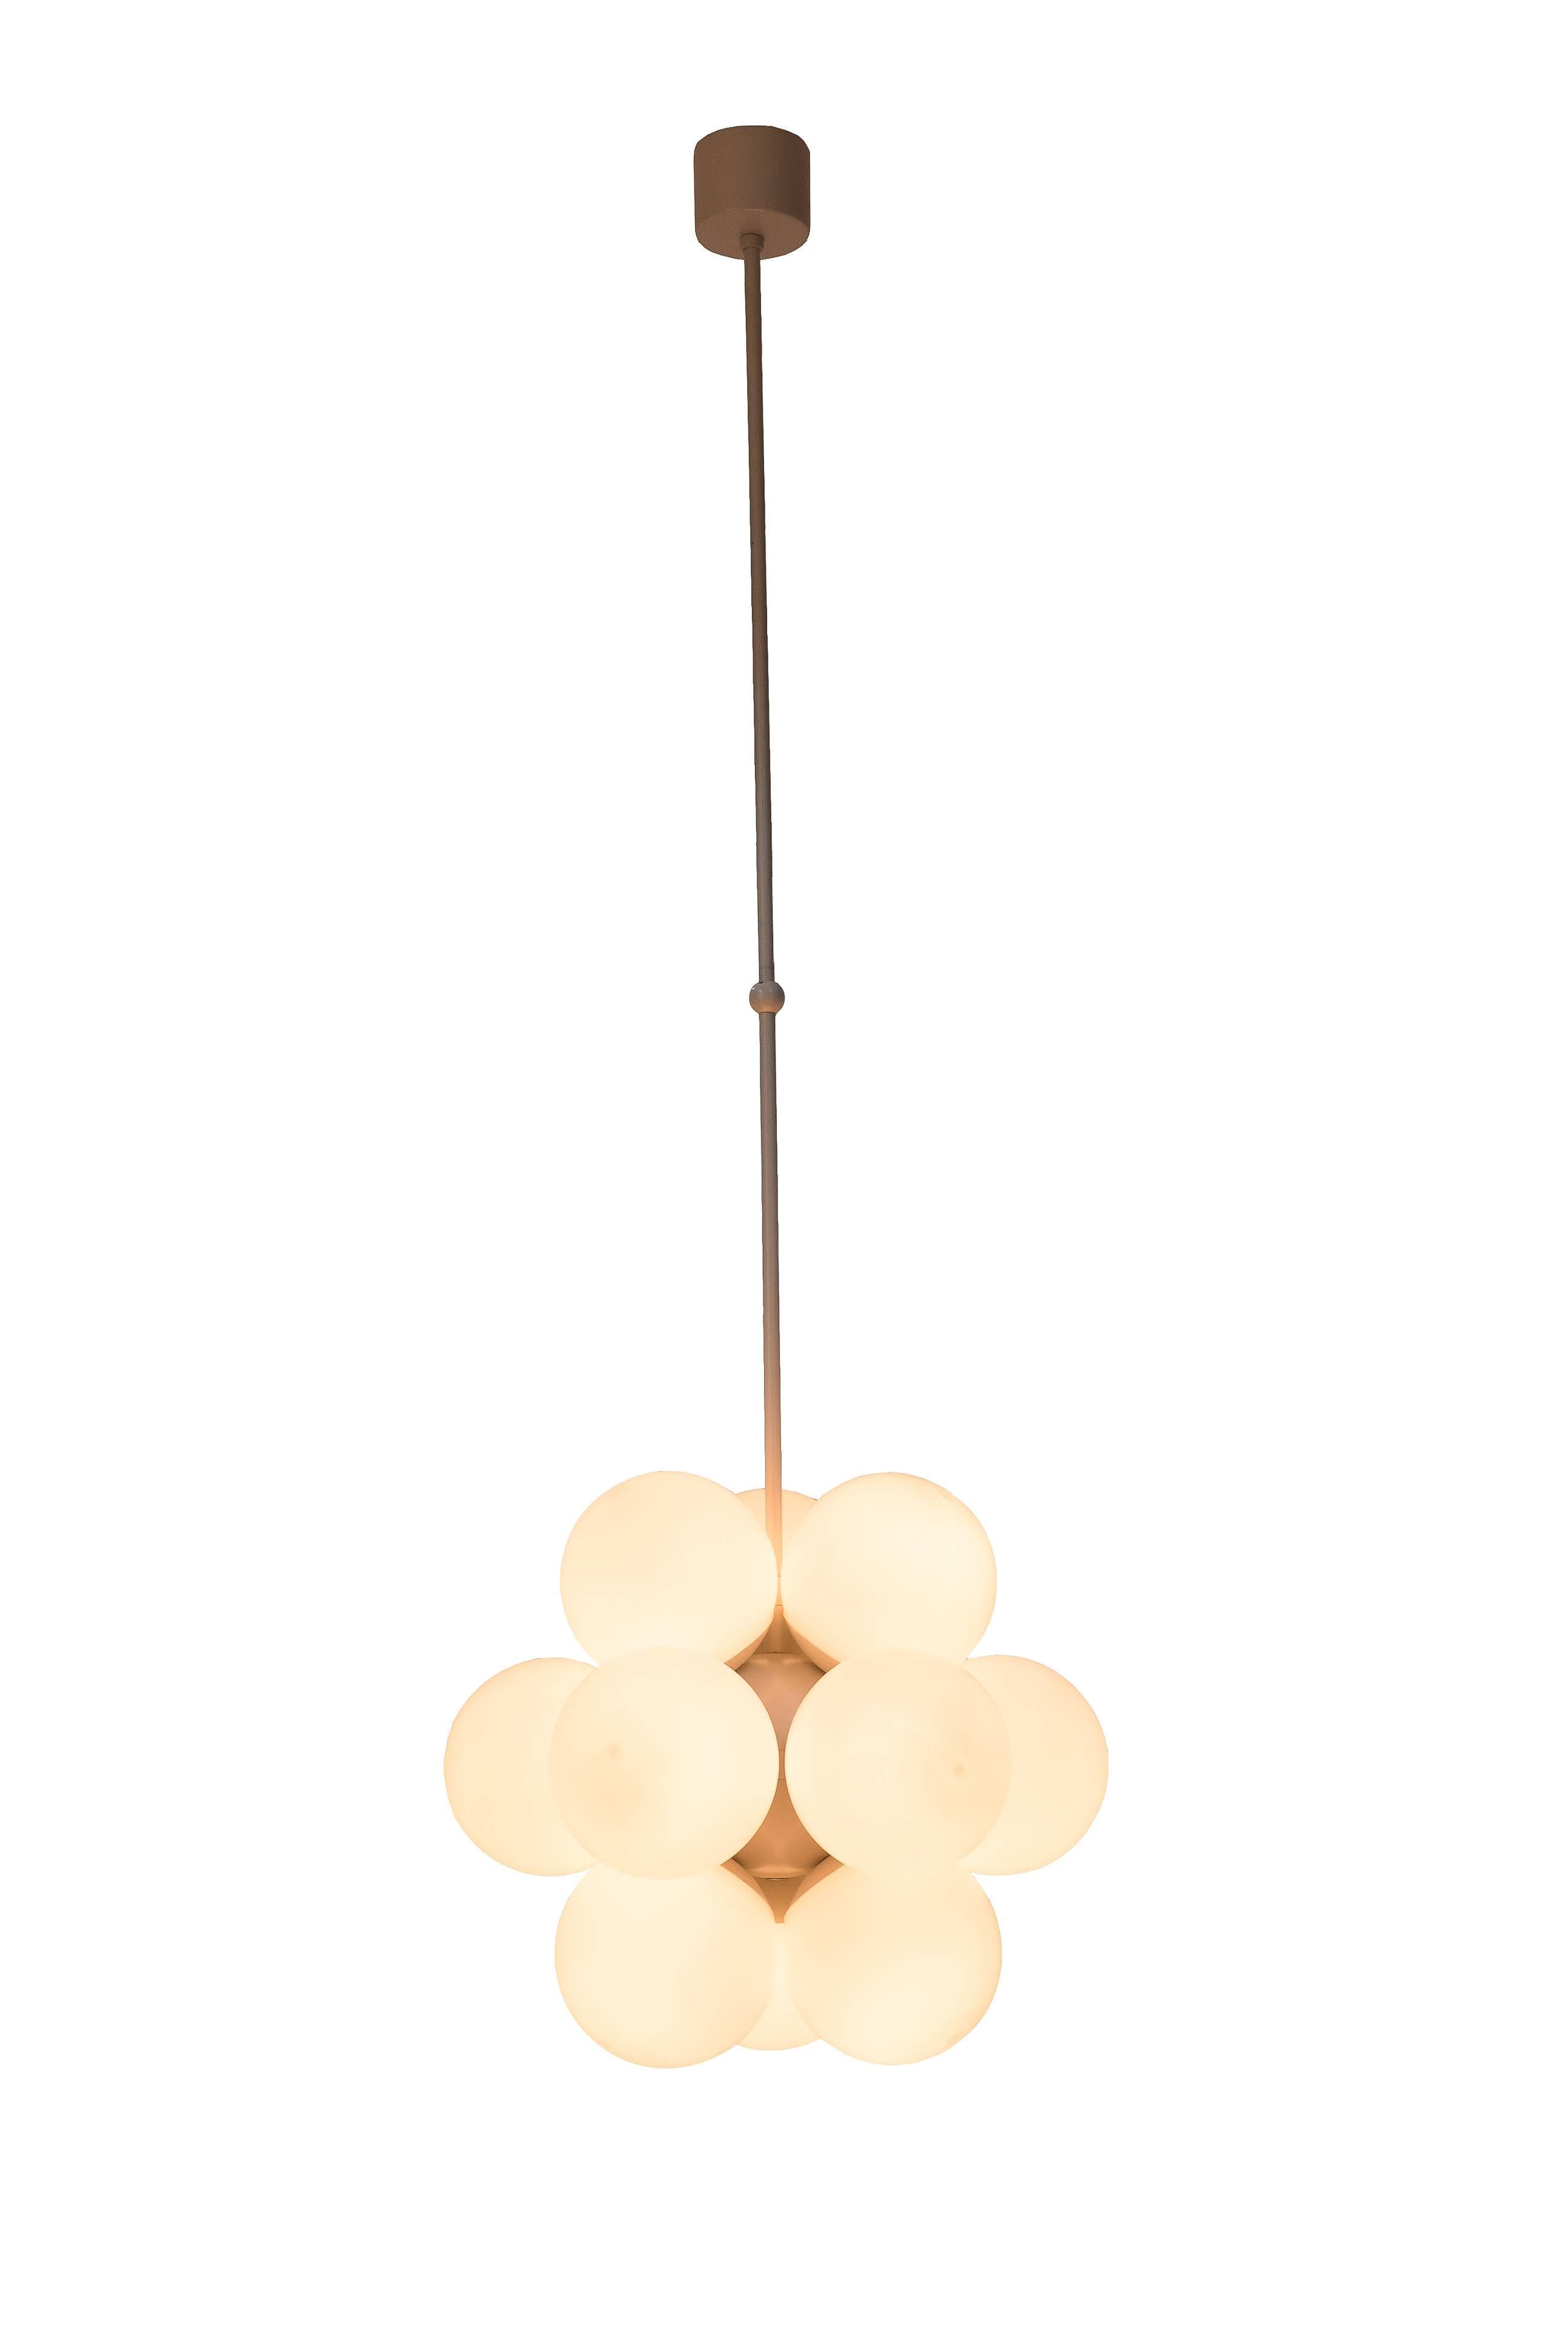 This gorgeous 1970s Mid-Century Modernist chandelier was designed by Kaiser Leuchten and it features and enameled brass frame and 12 handblown double layer opal glass globes.

Made in Germany, circa 1970

Measures: 15